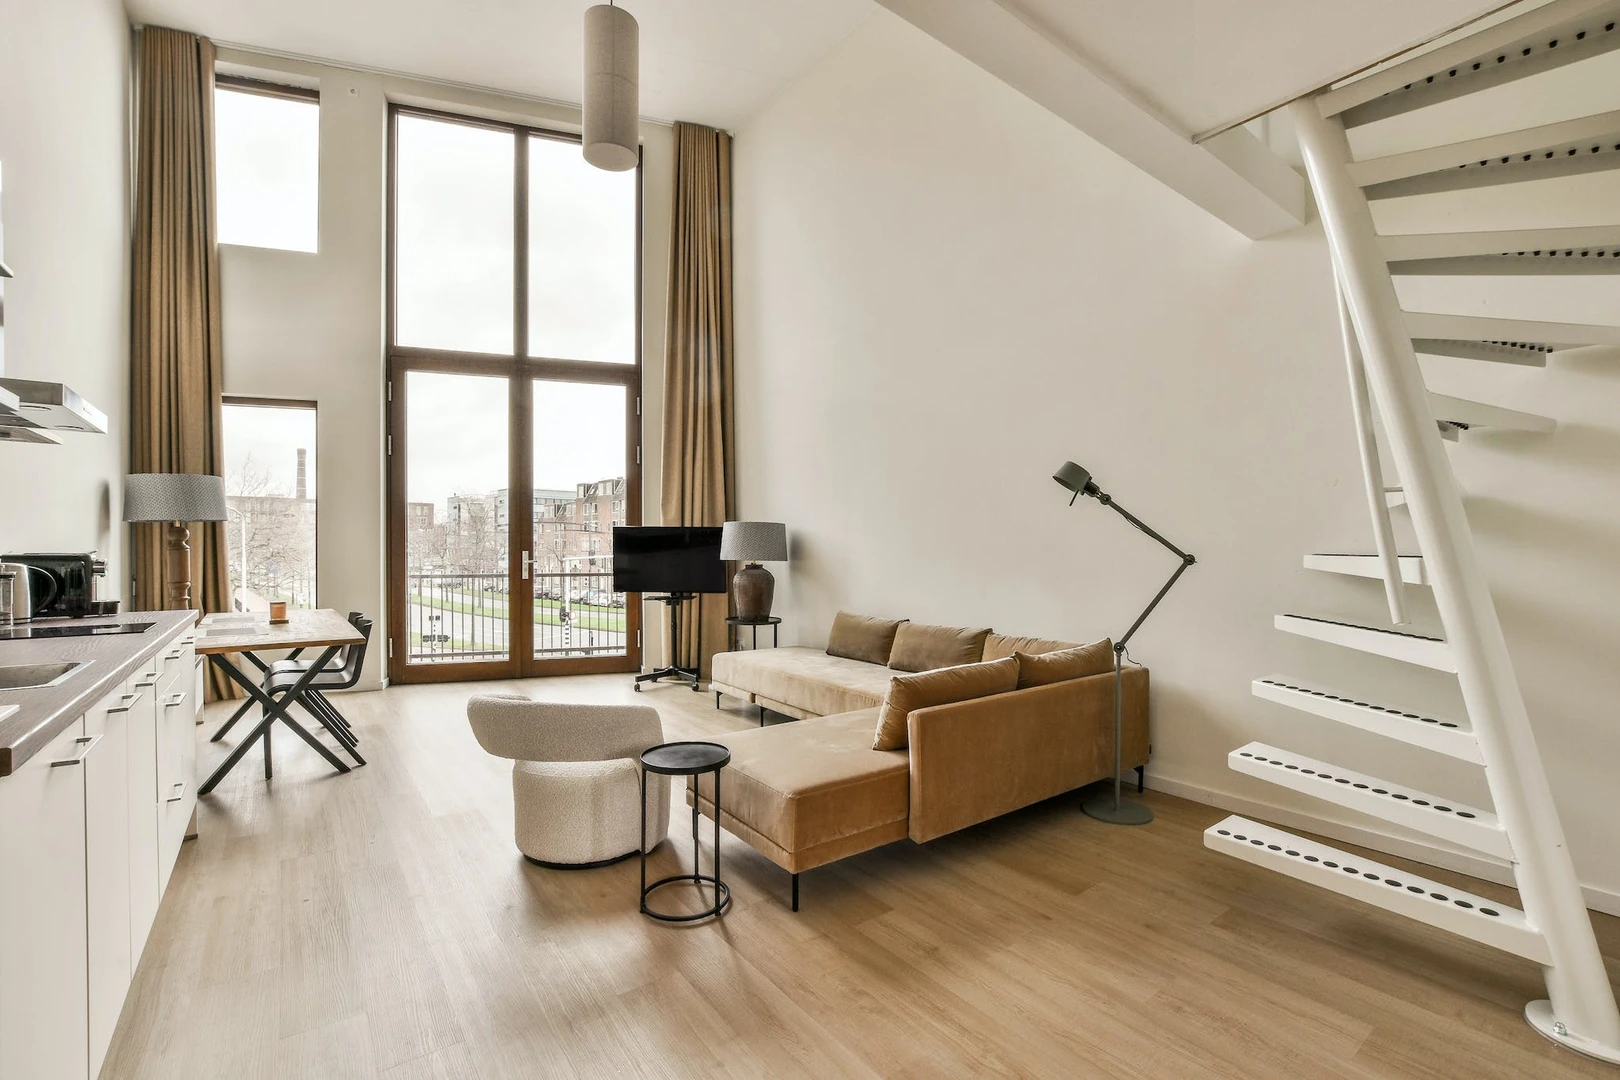 Modern and bright flat in Delft